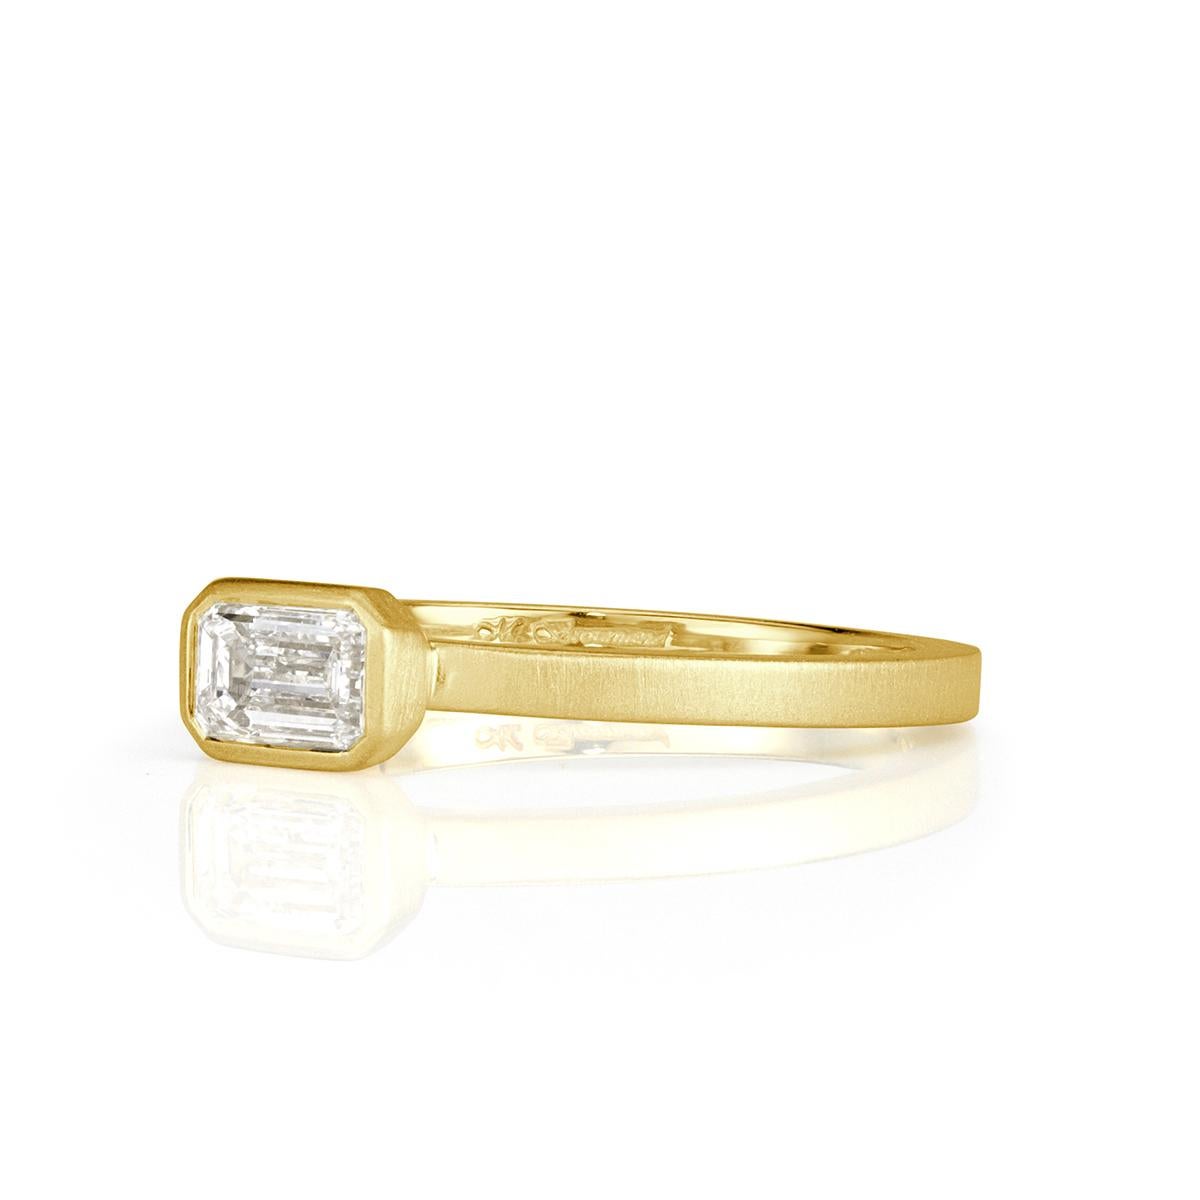 This chic diamond band showcases an exquisite 0.45ct emerald cut center diamond graded at F in color, VS1 in clarity. It is bezel set in a satin finish, 18k yellow gold setting style. Absolutely perfect for everyday wear!
